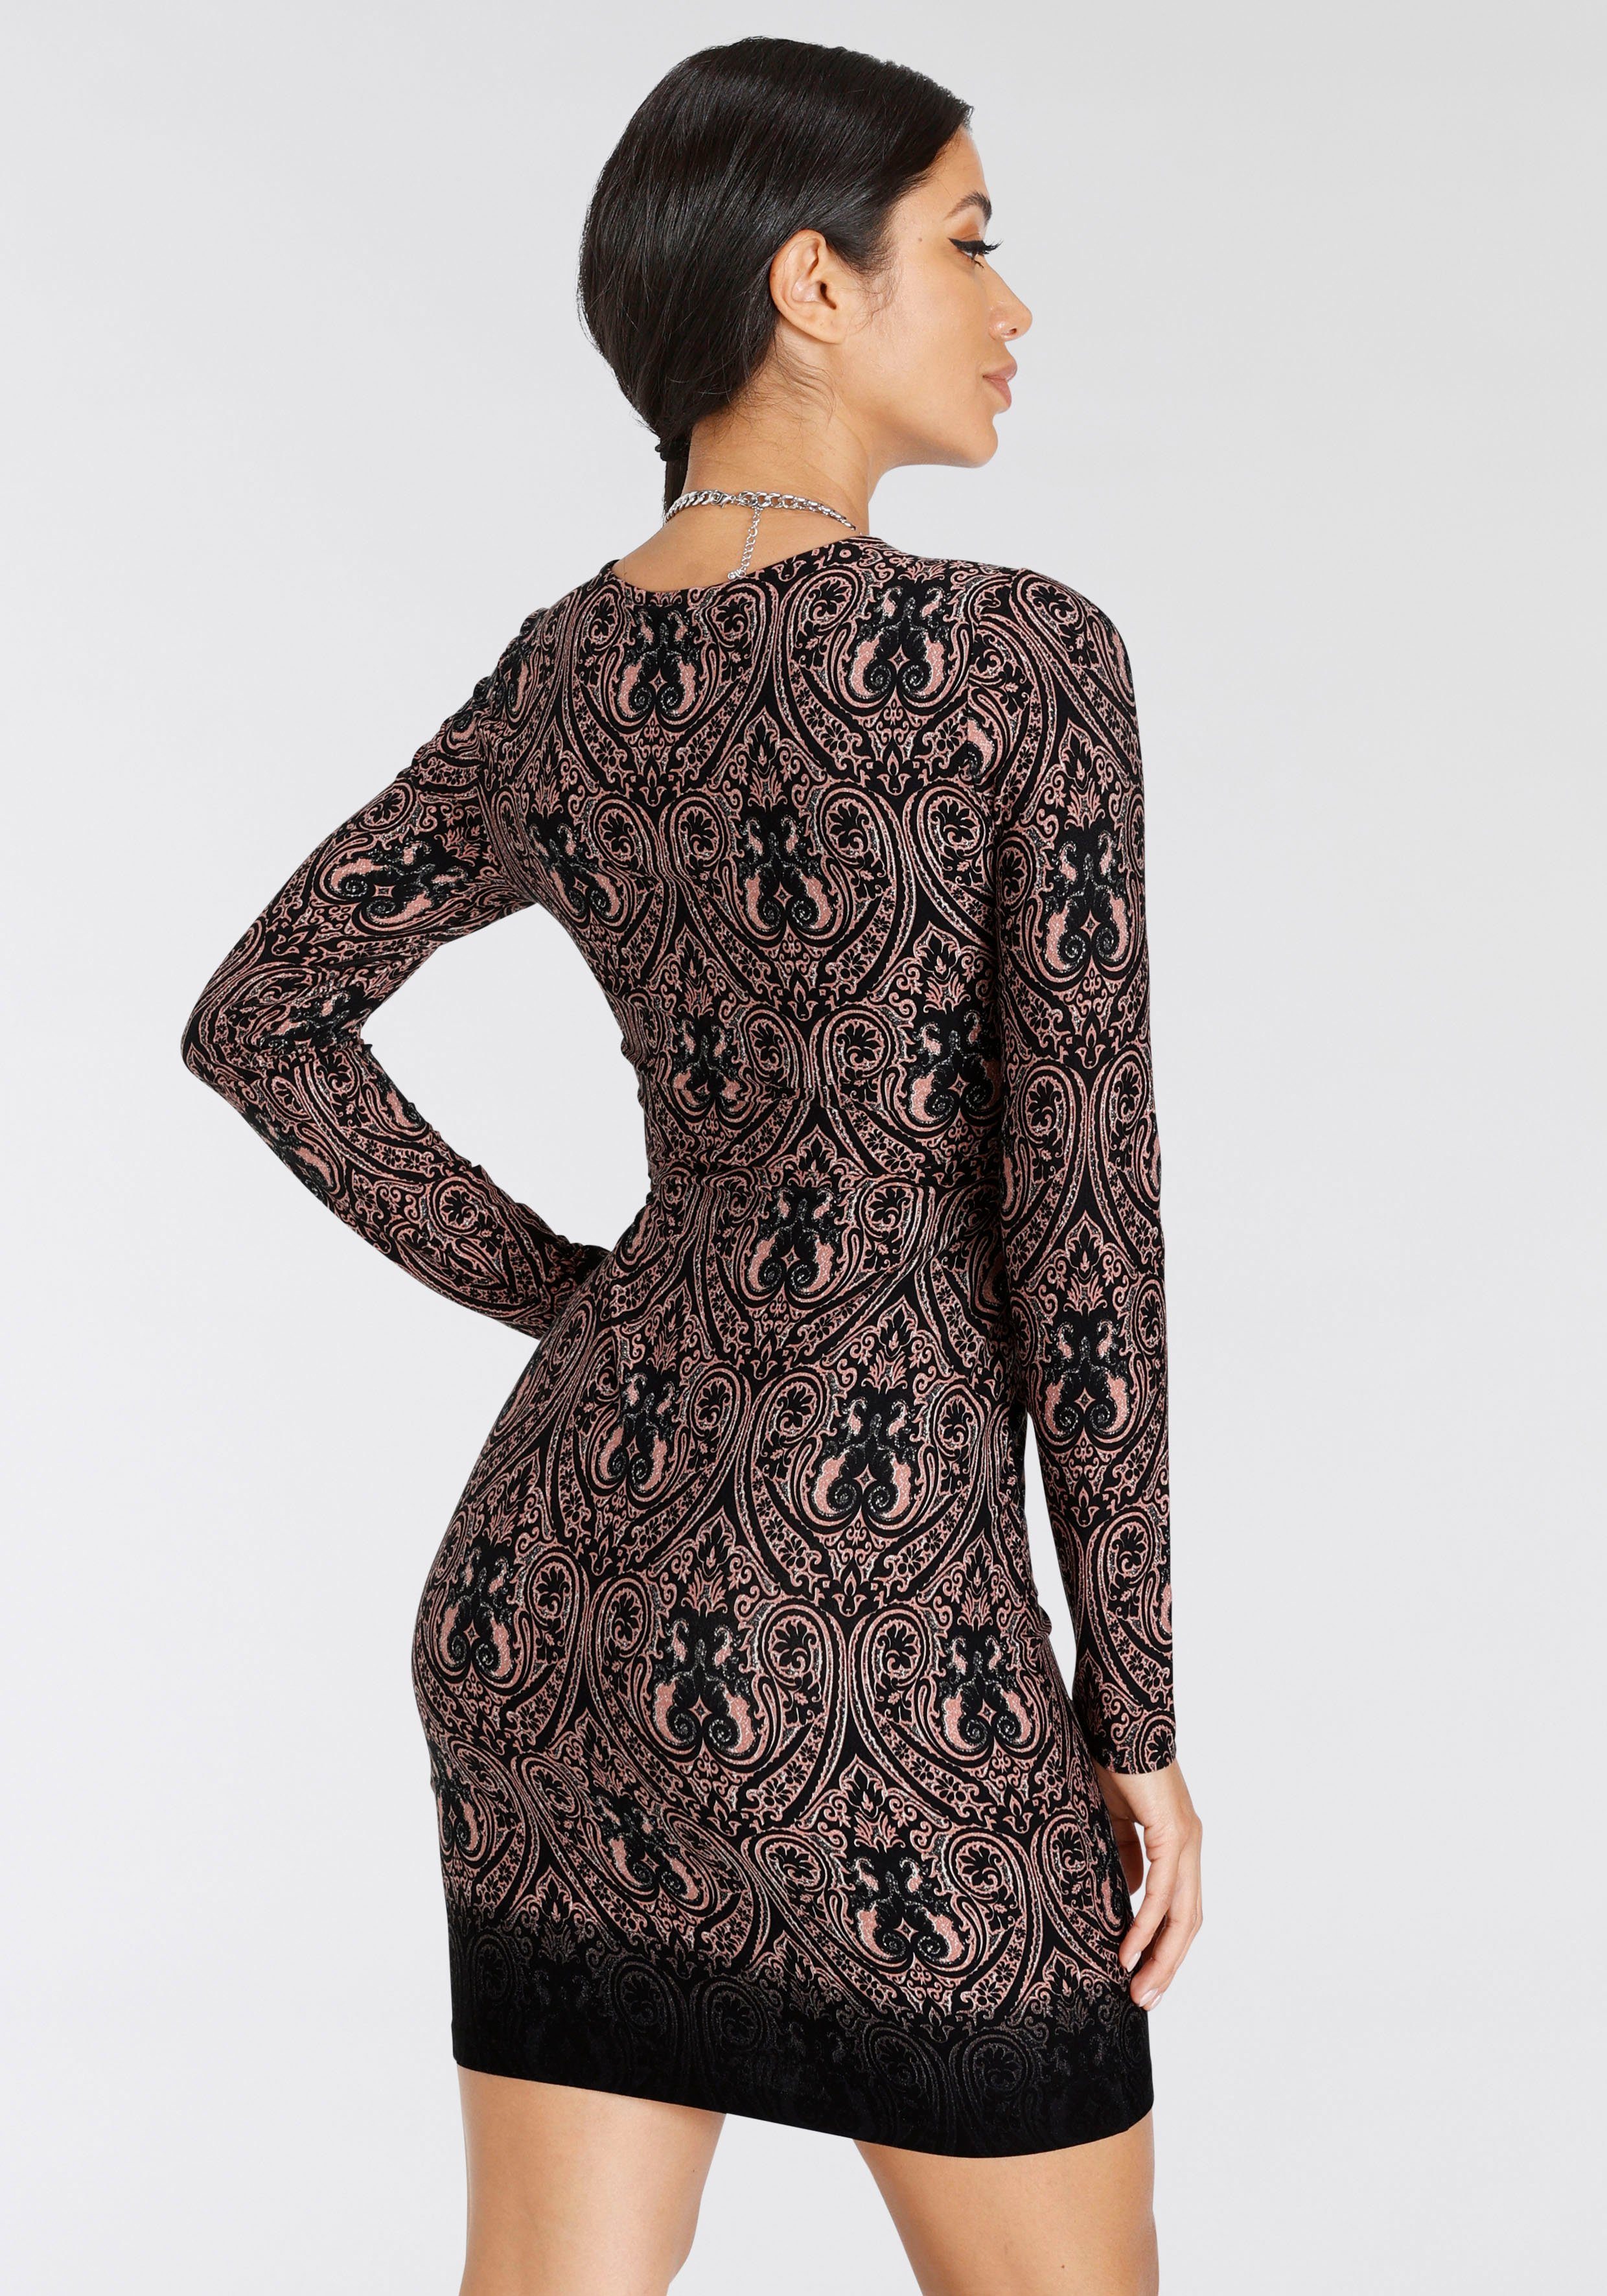 Paisley-Muster Cut-Out und mit Melrose Jerseykleid